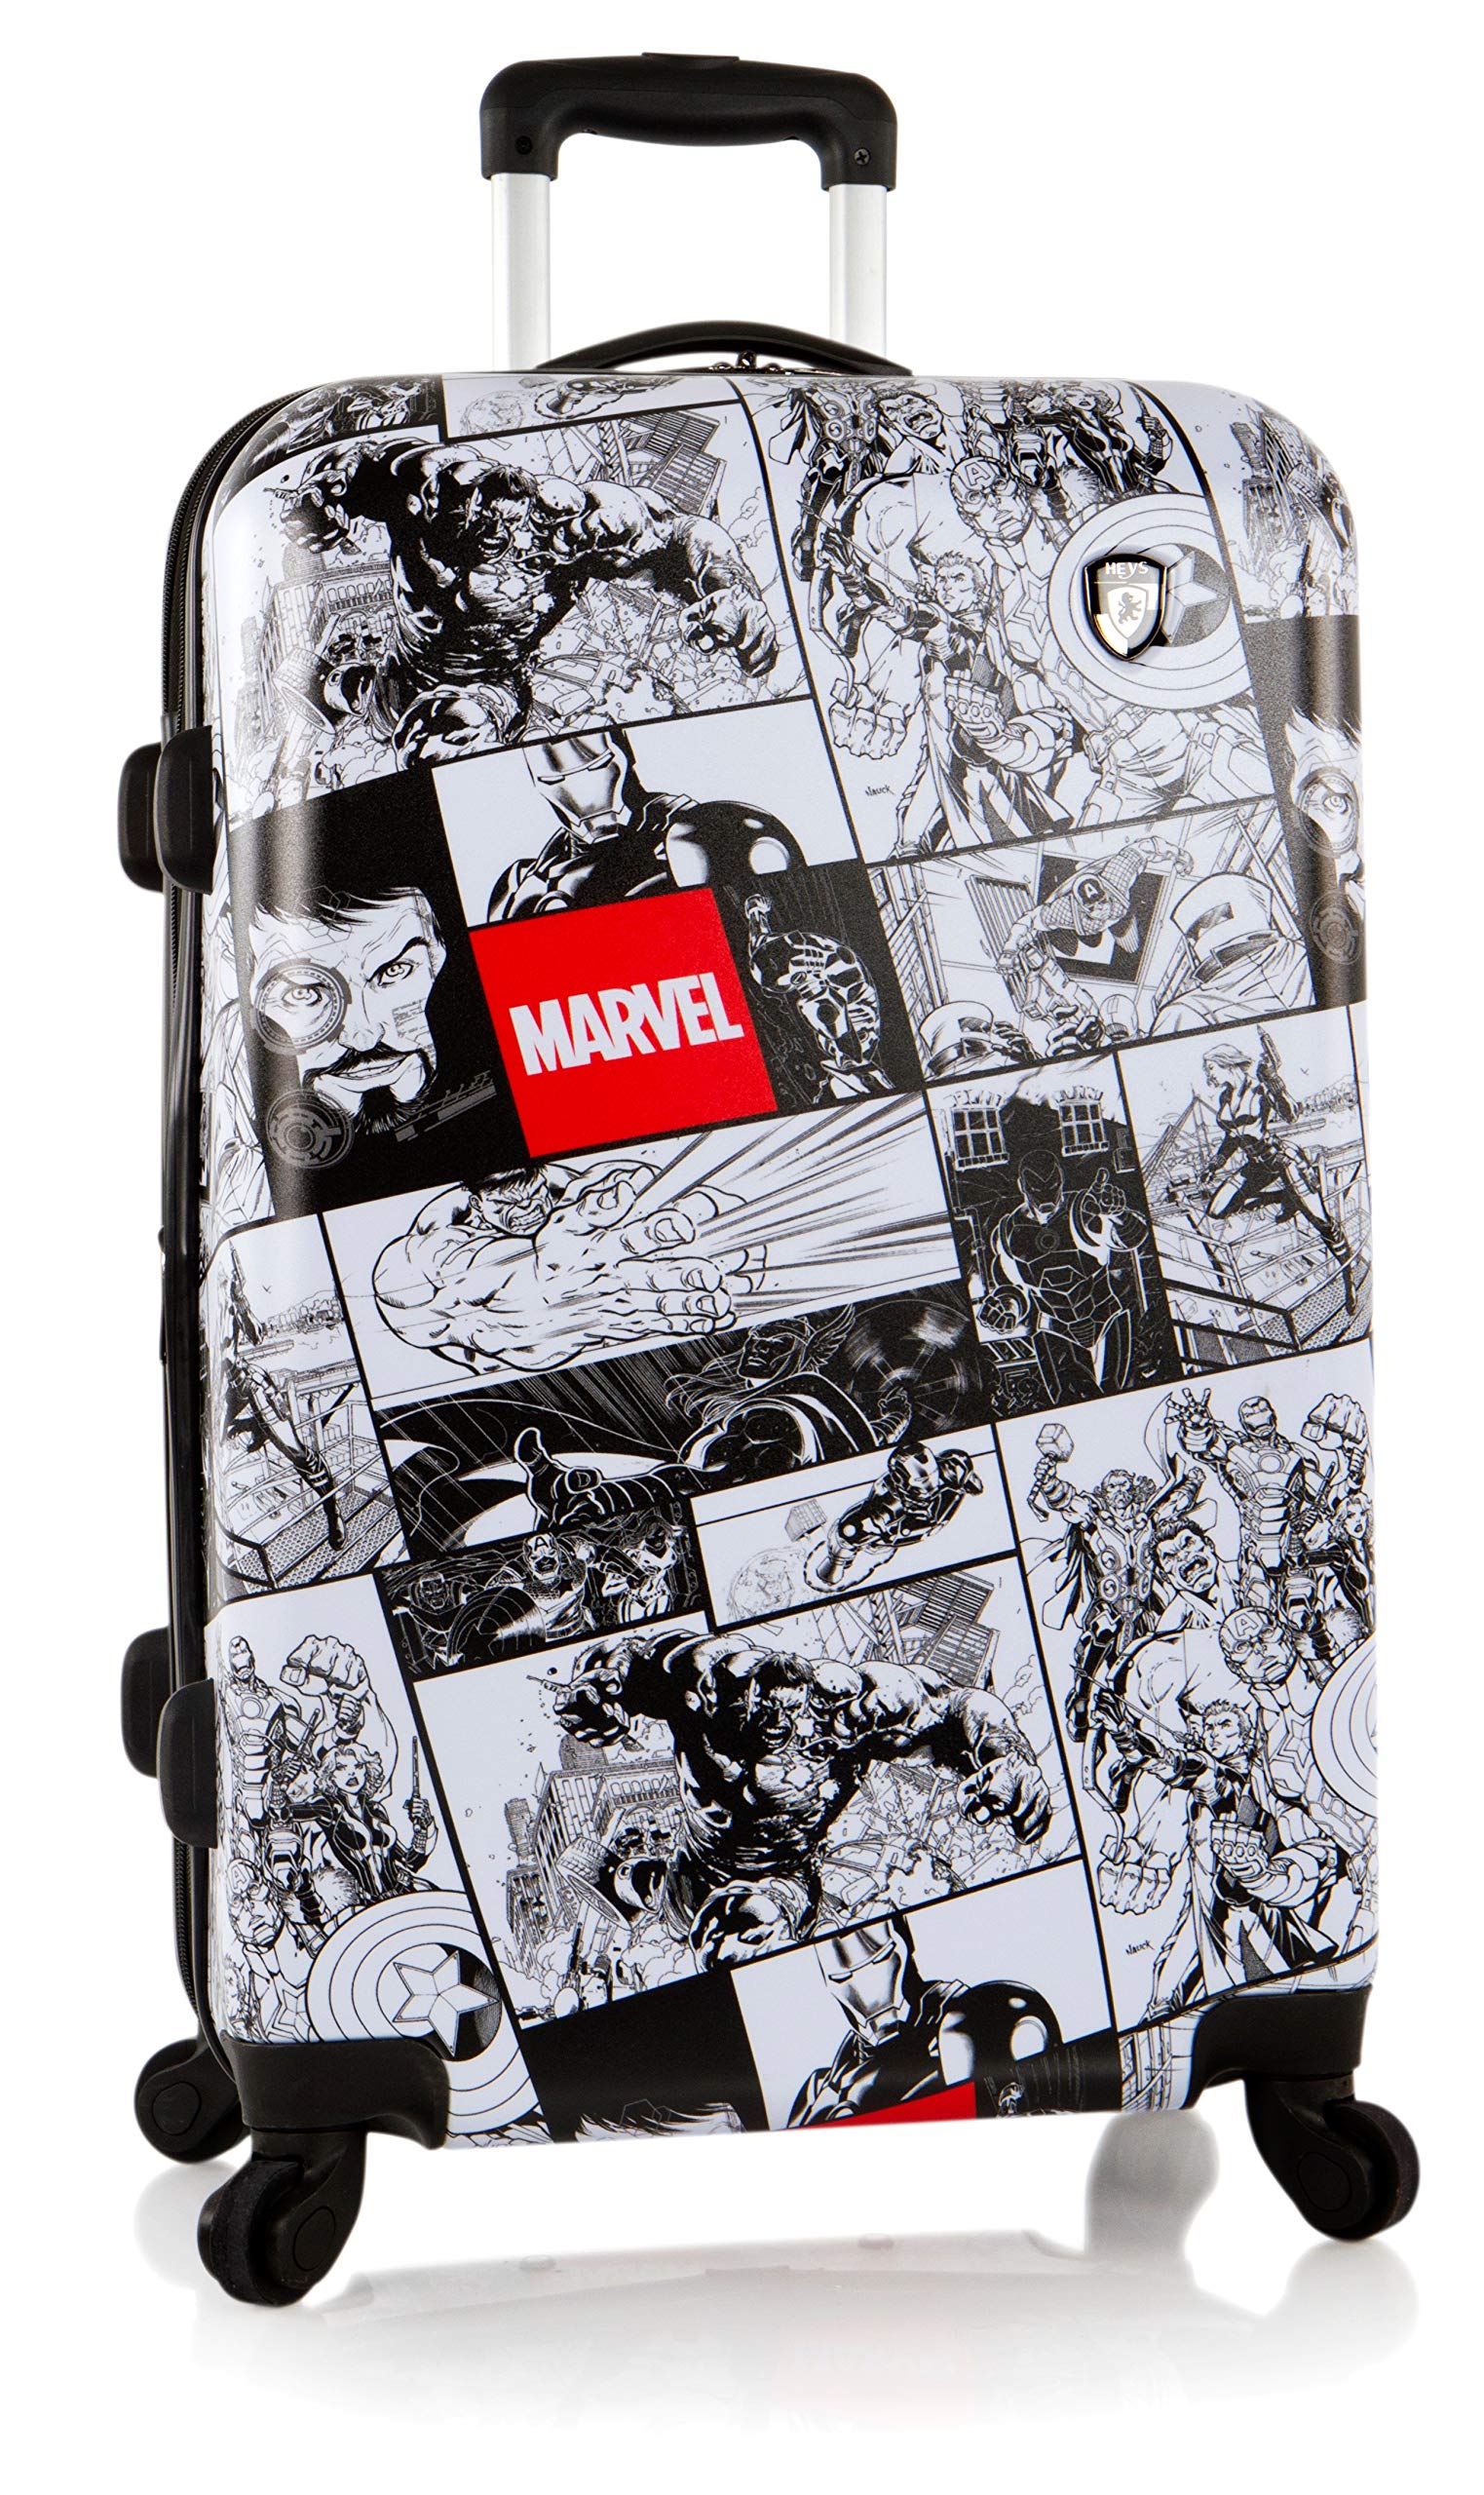 Personalized Marvel Avengers Backpack - 16 Inch – Dibsies Personalization  Station